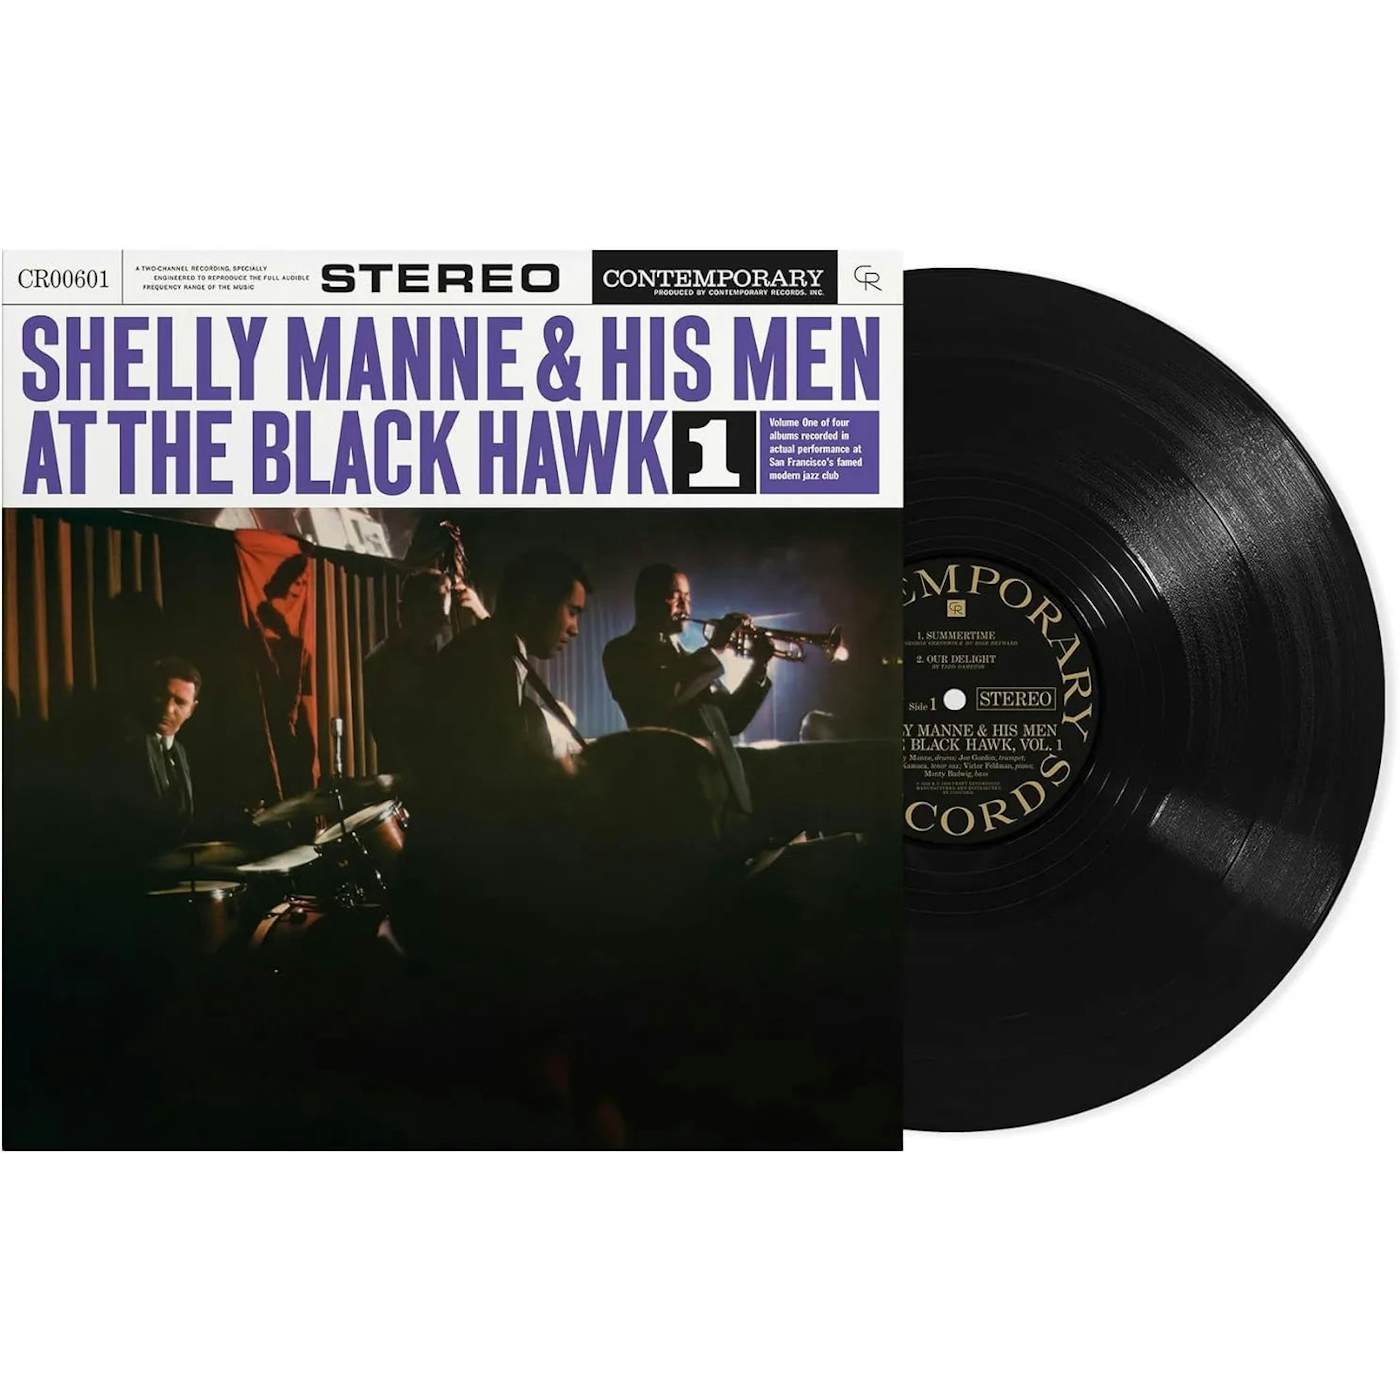 Shelly Manne & His Men - At The Black Hawk, Vol. 1